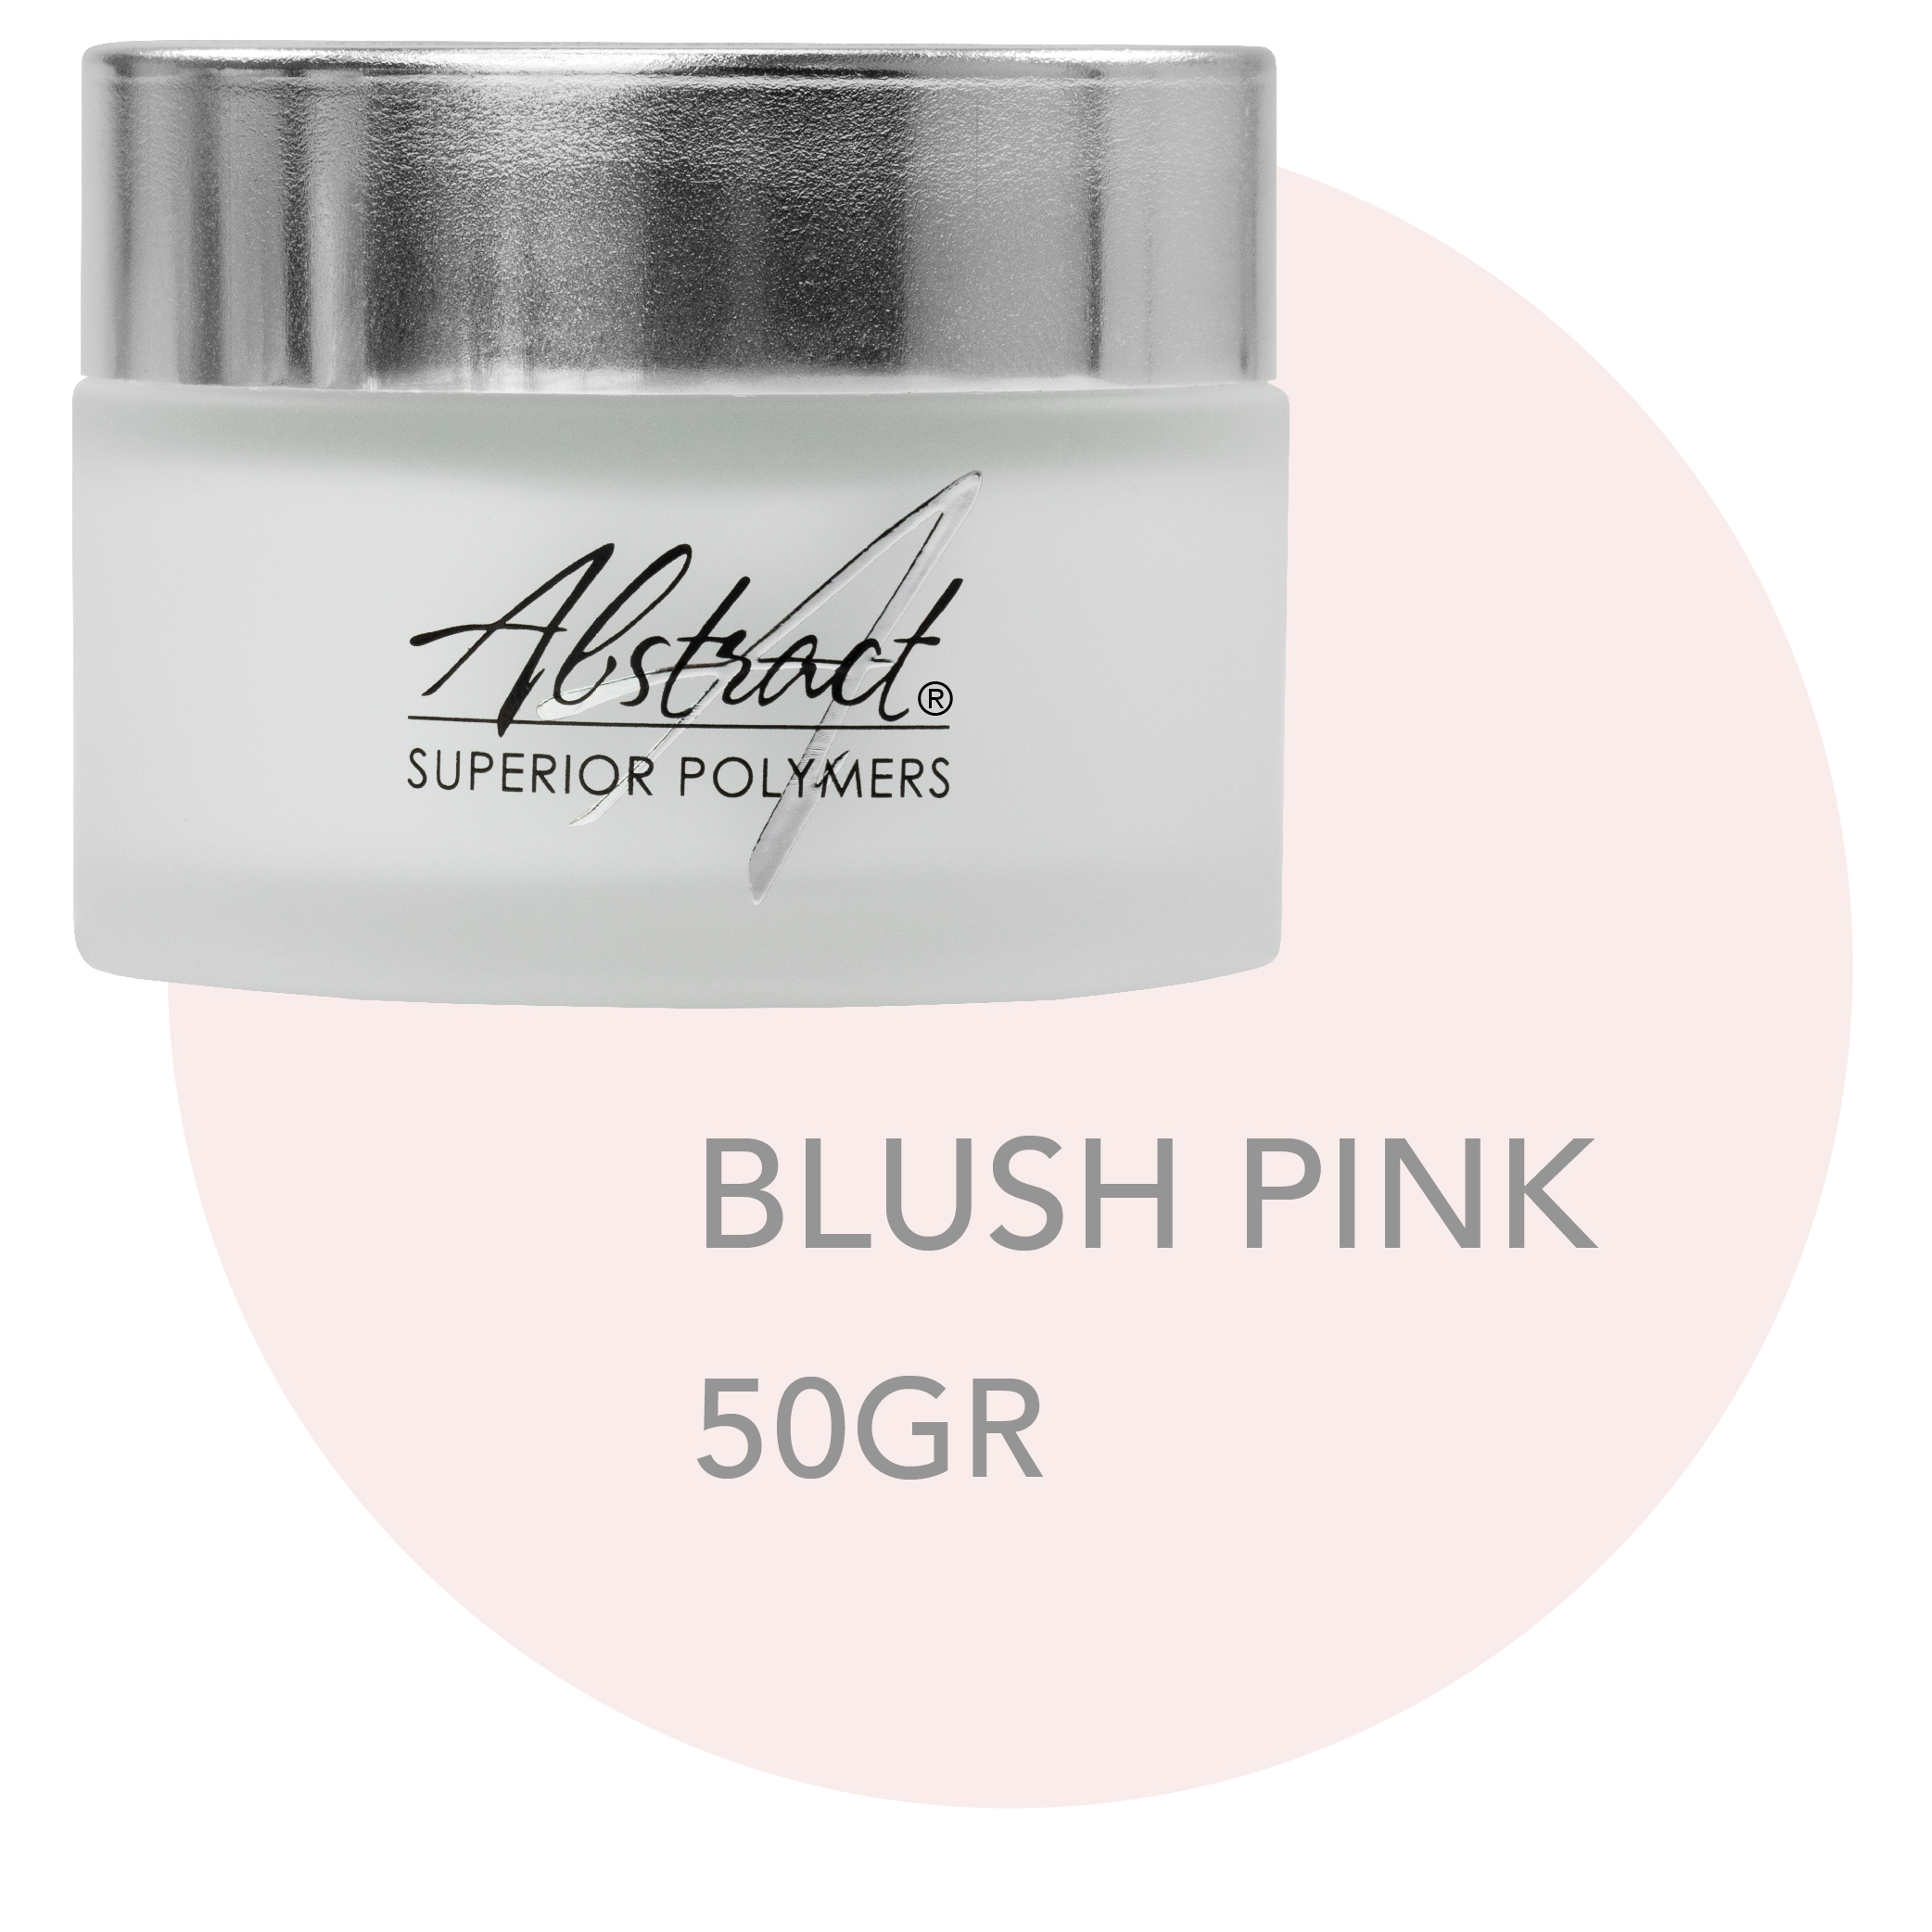 Superior Polymer BLUSH PINK 50gr, Abstract | 233576